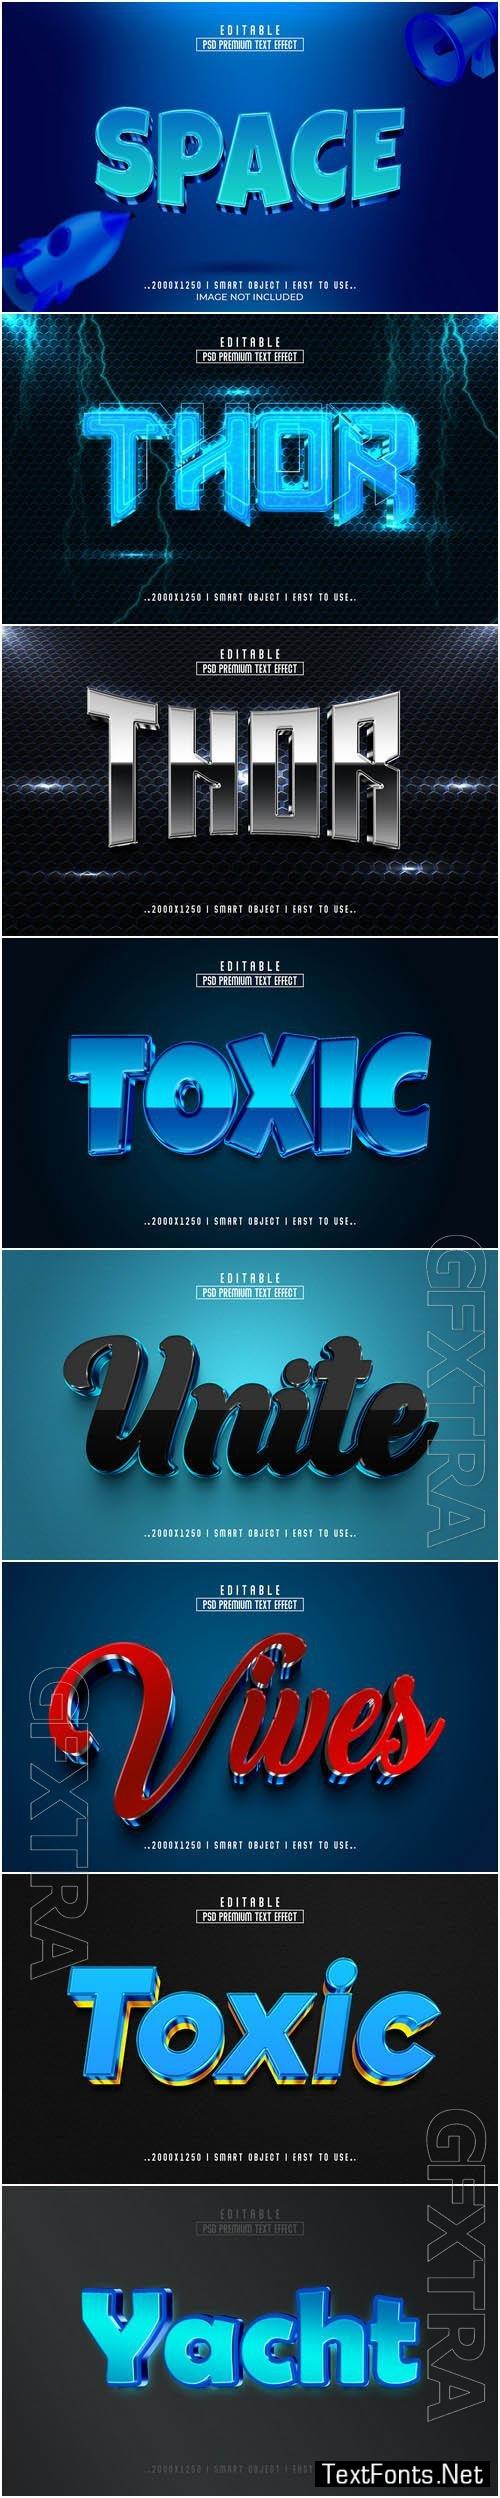 text style for photoshop